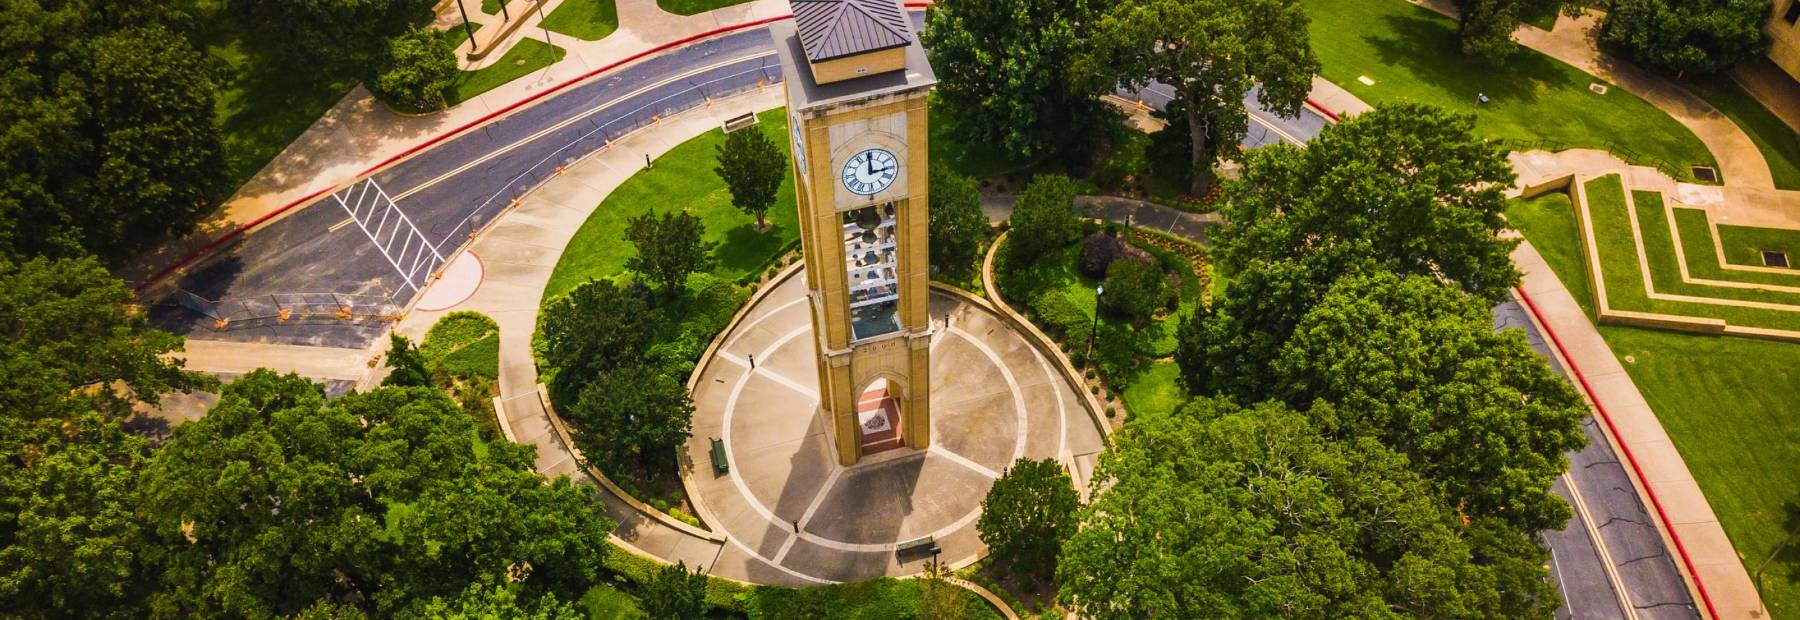 An overhead shot of the clock tower on campus